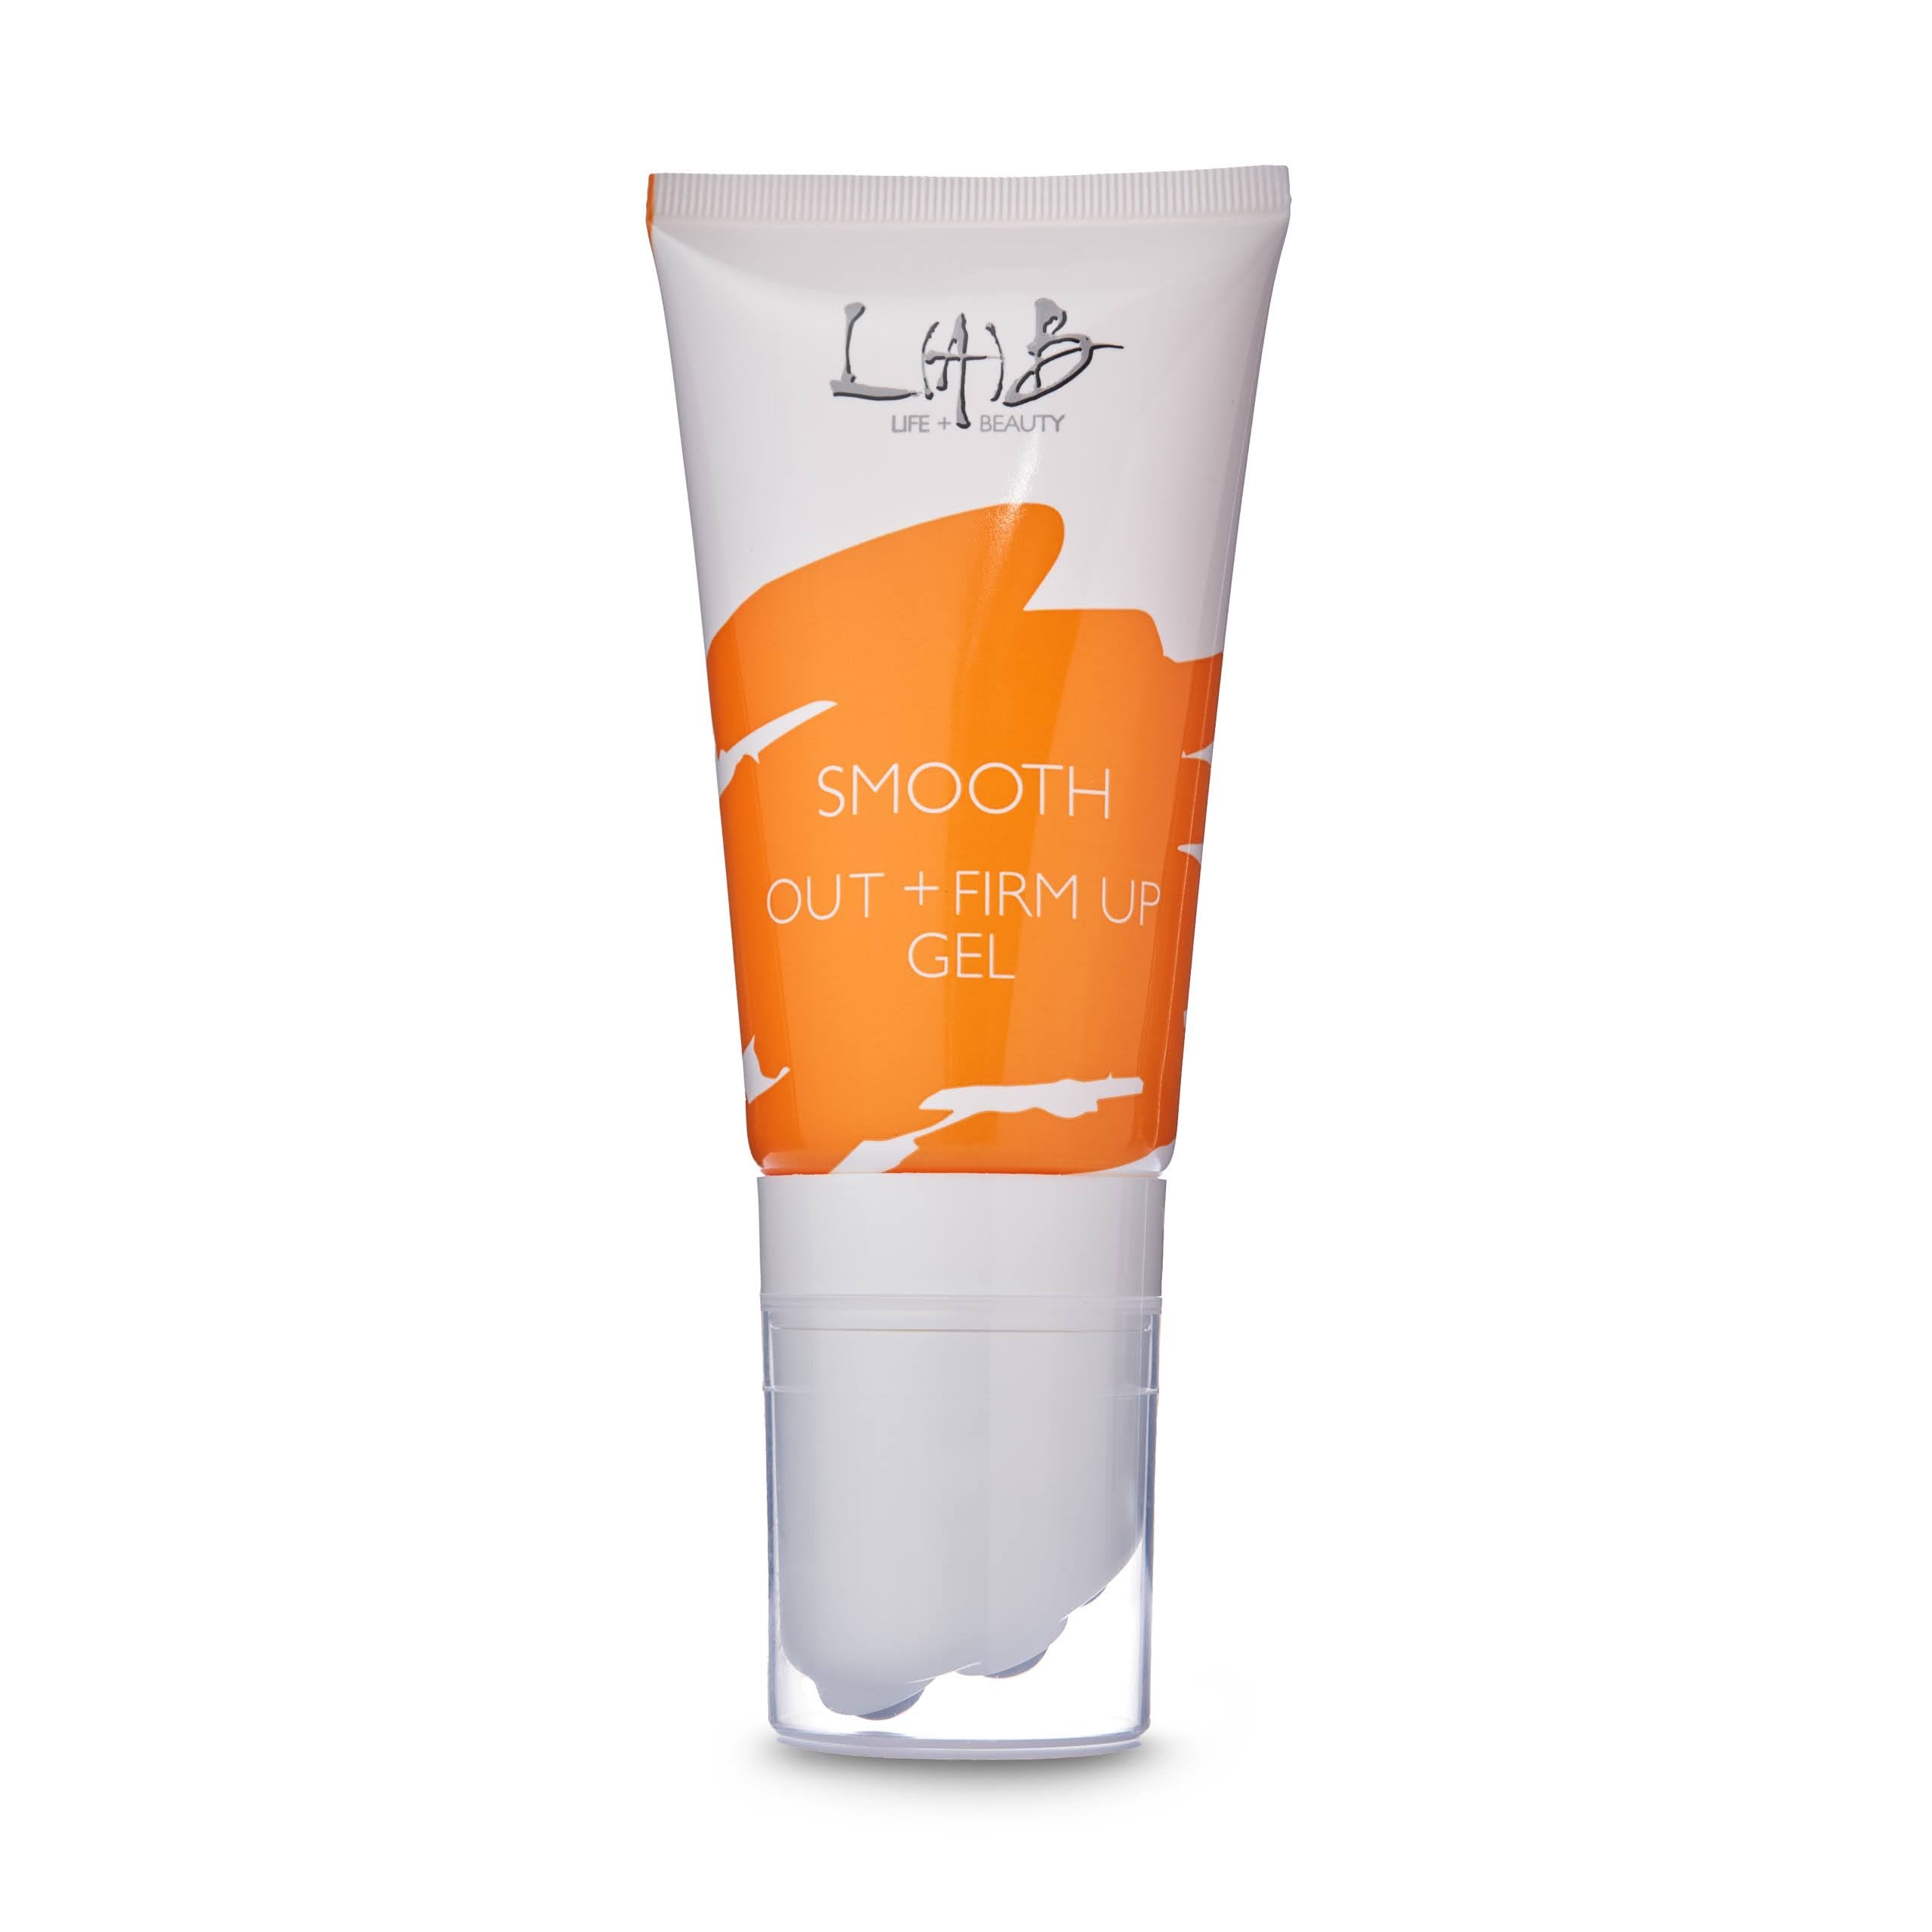 Smooth out Firm Up Gel